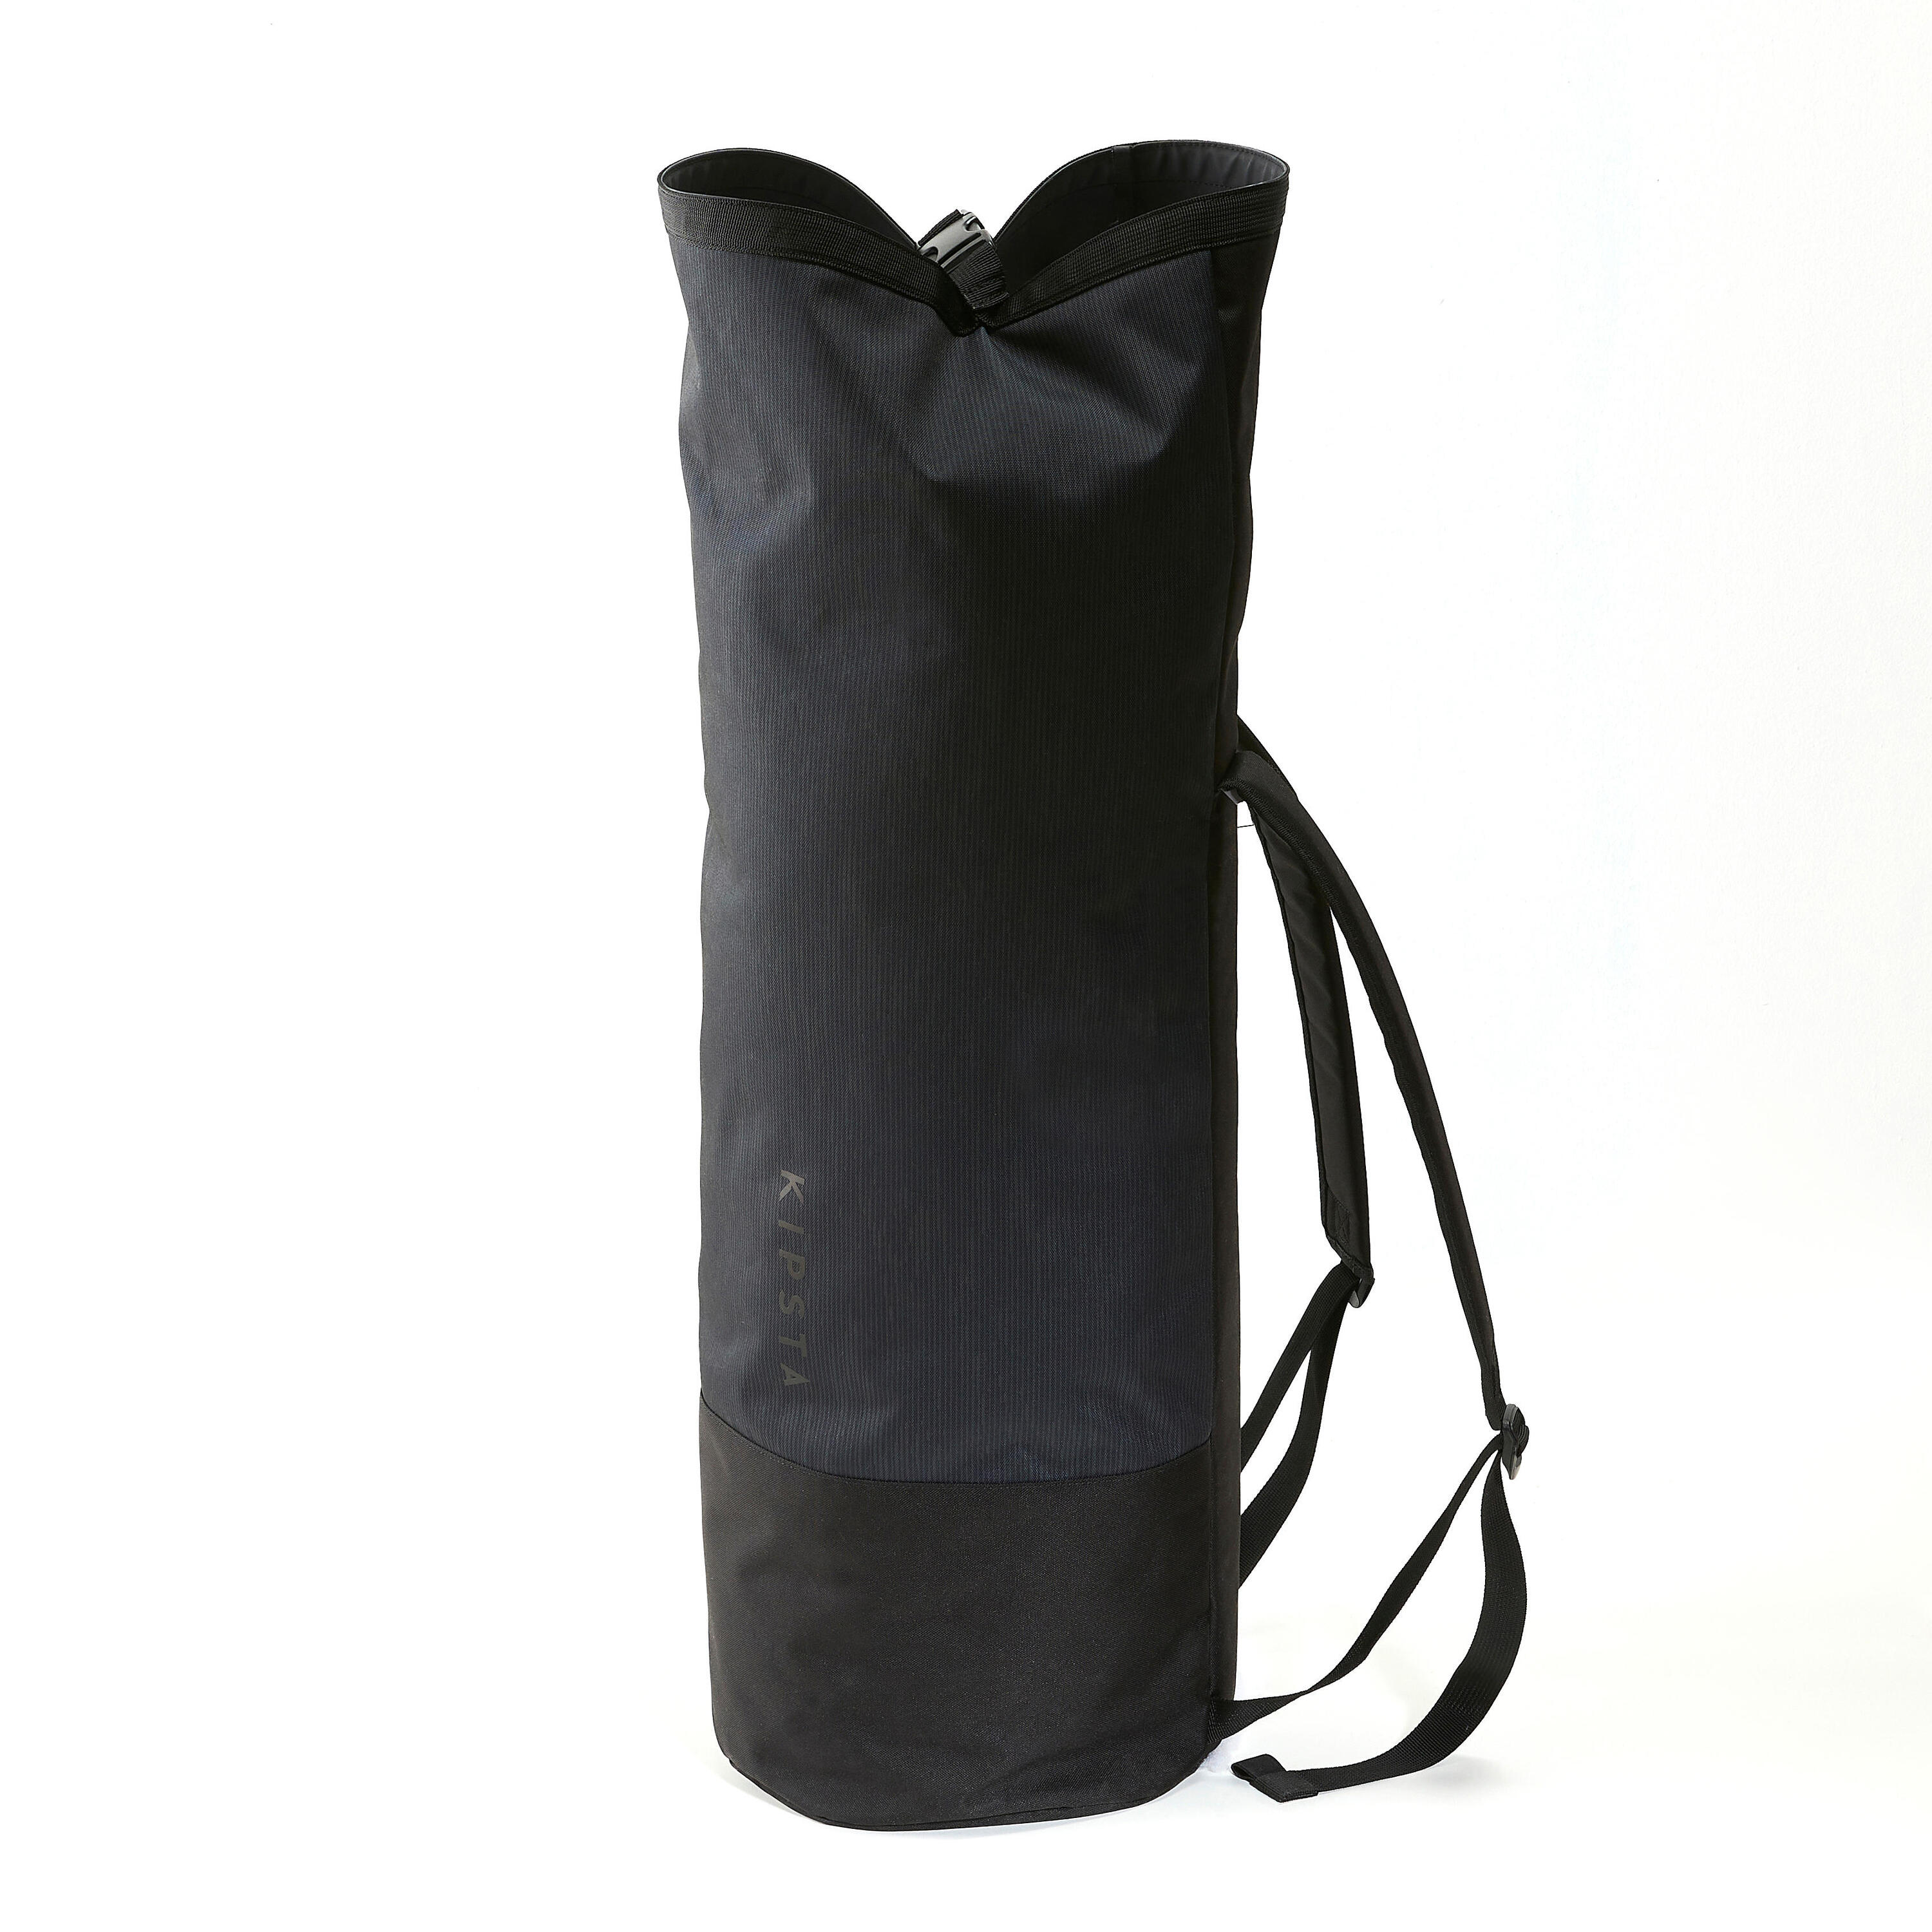 45L Backpack for Accessories - Black 4/6